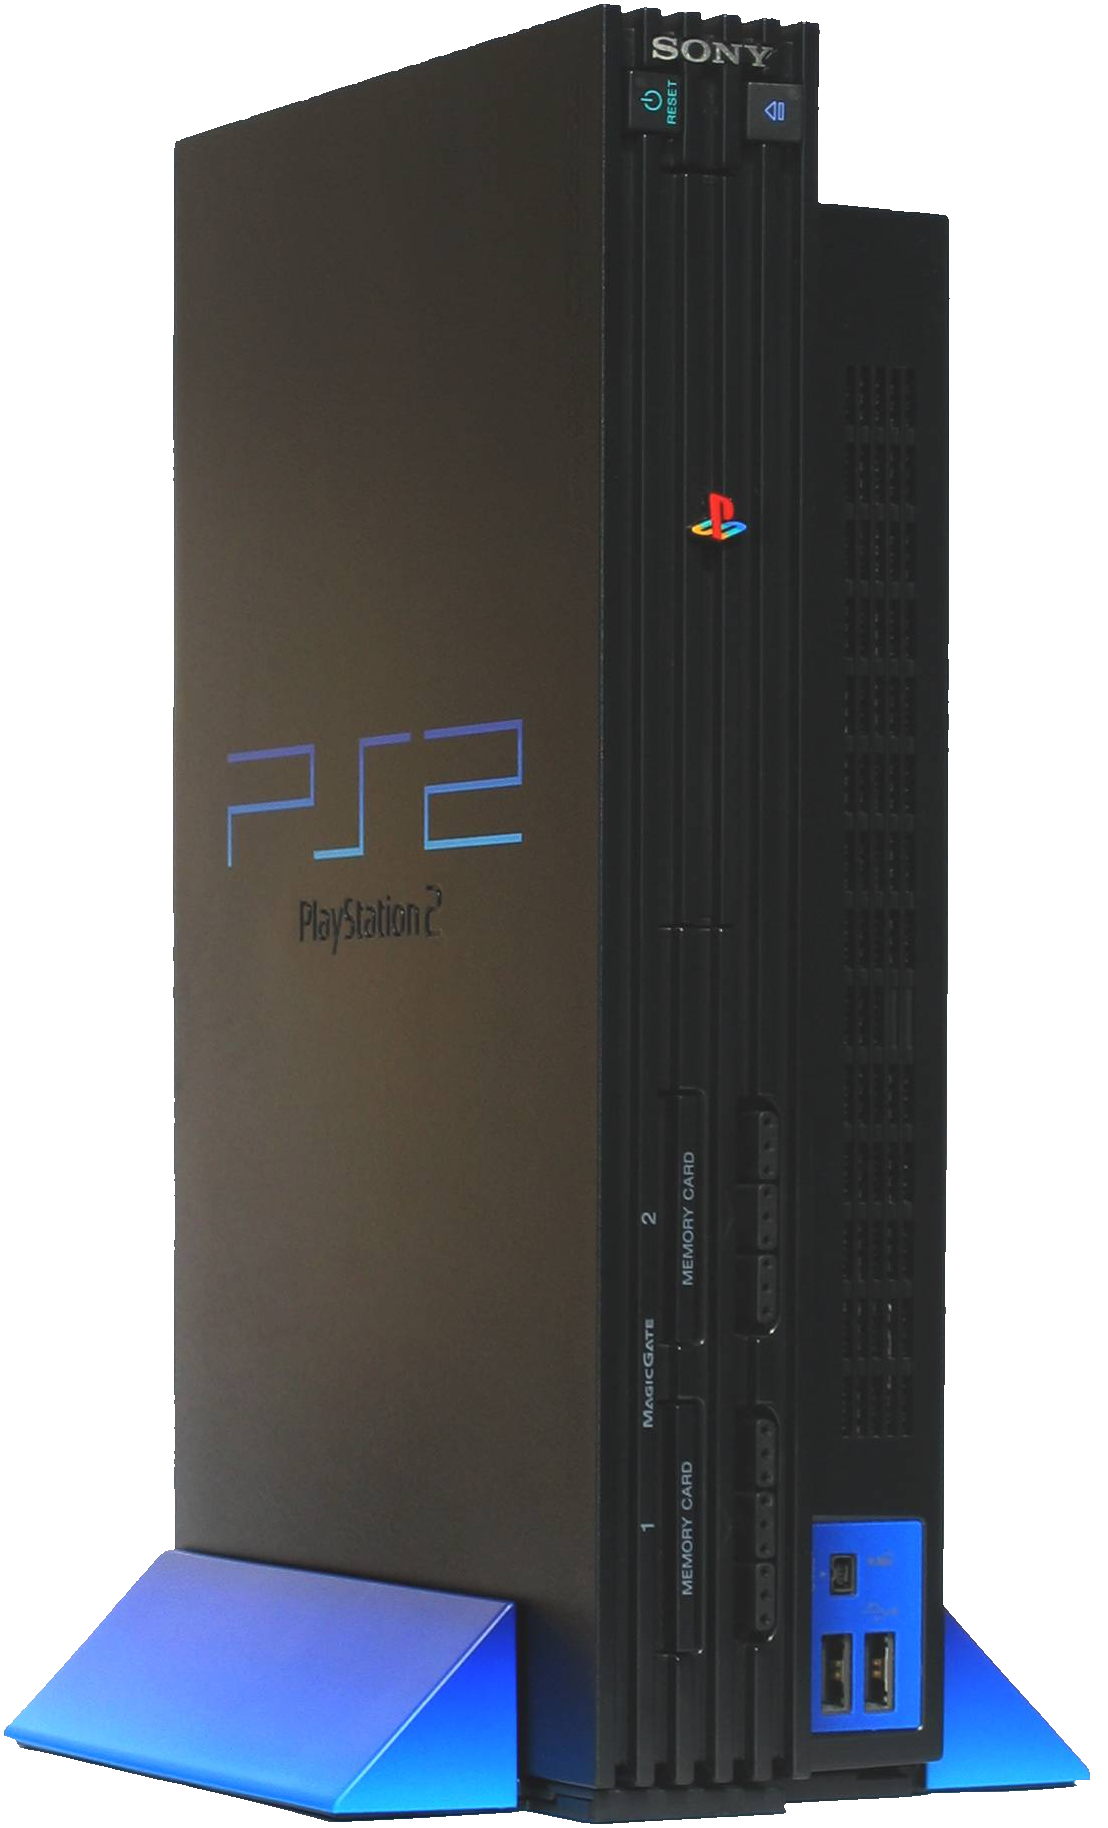 Playstation 2 Backgrounds on Wallpapers Vista